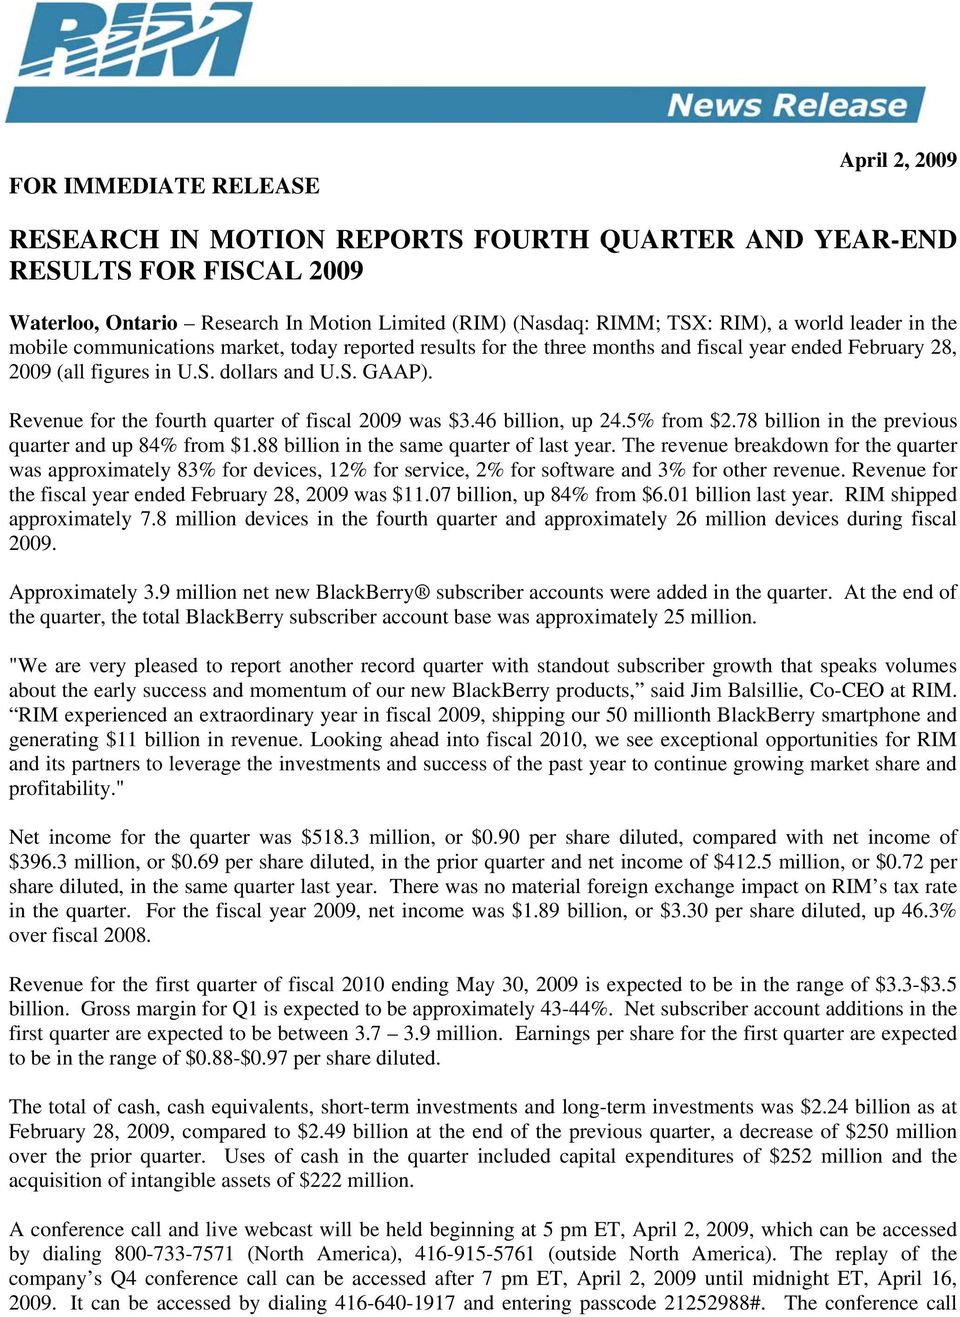 Revenue for the fourth quarter of fiscal 2009 was $3.46 billion, up 24.5% from $2.78 billion in the previous quarter and up 84% from $1.88 billion in the same quarter of last year.